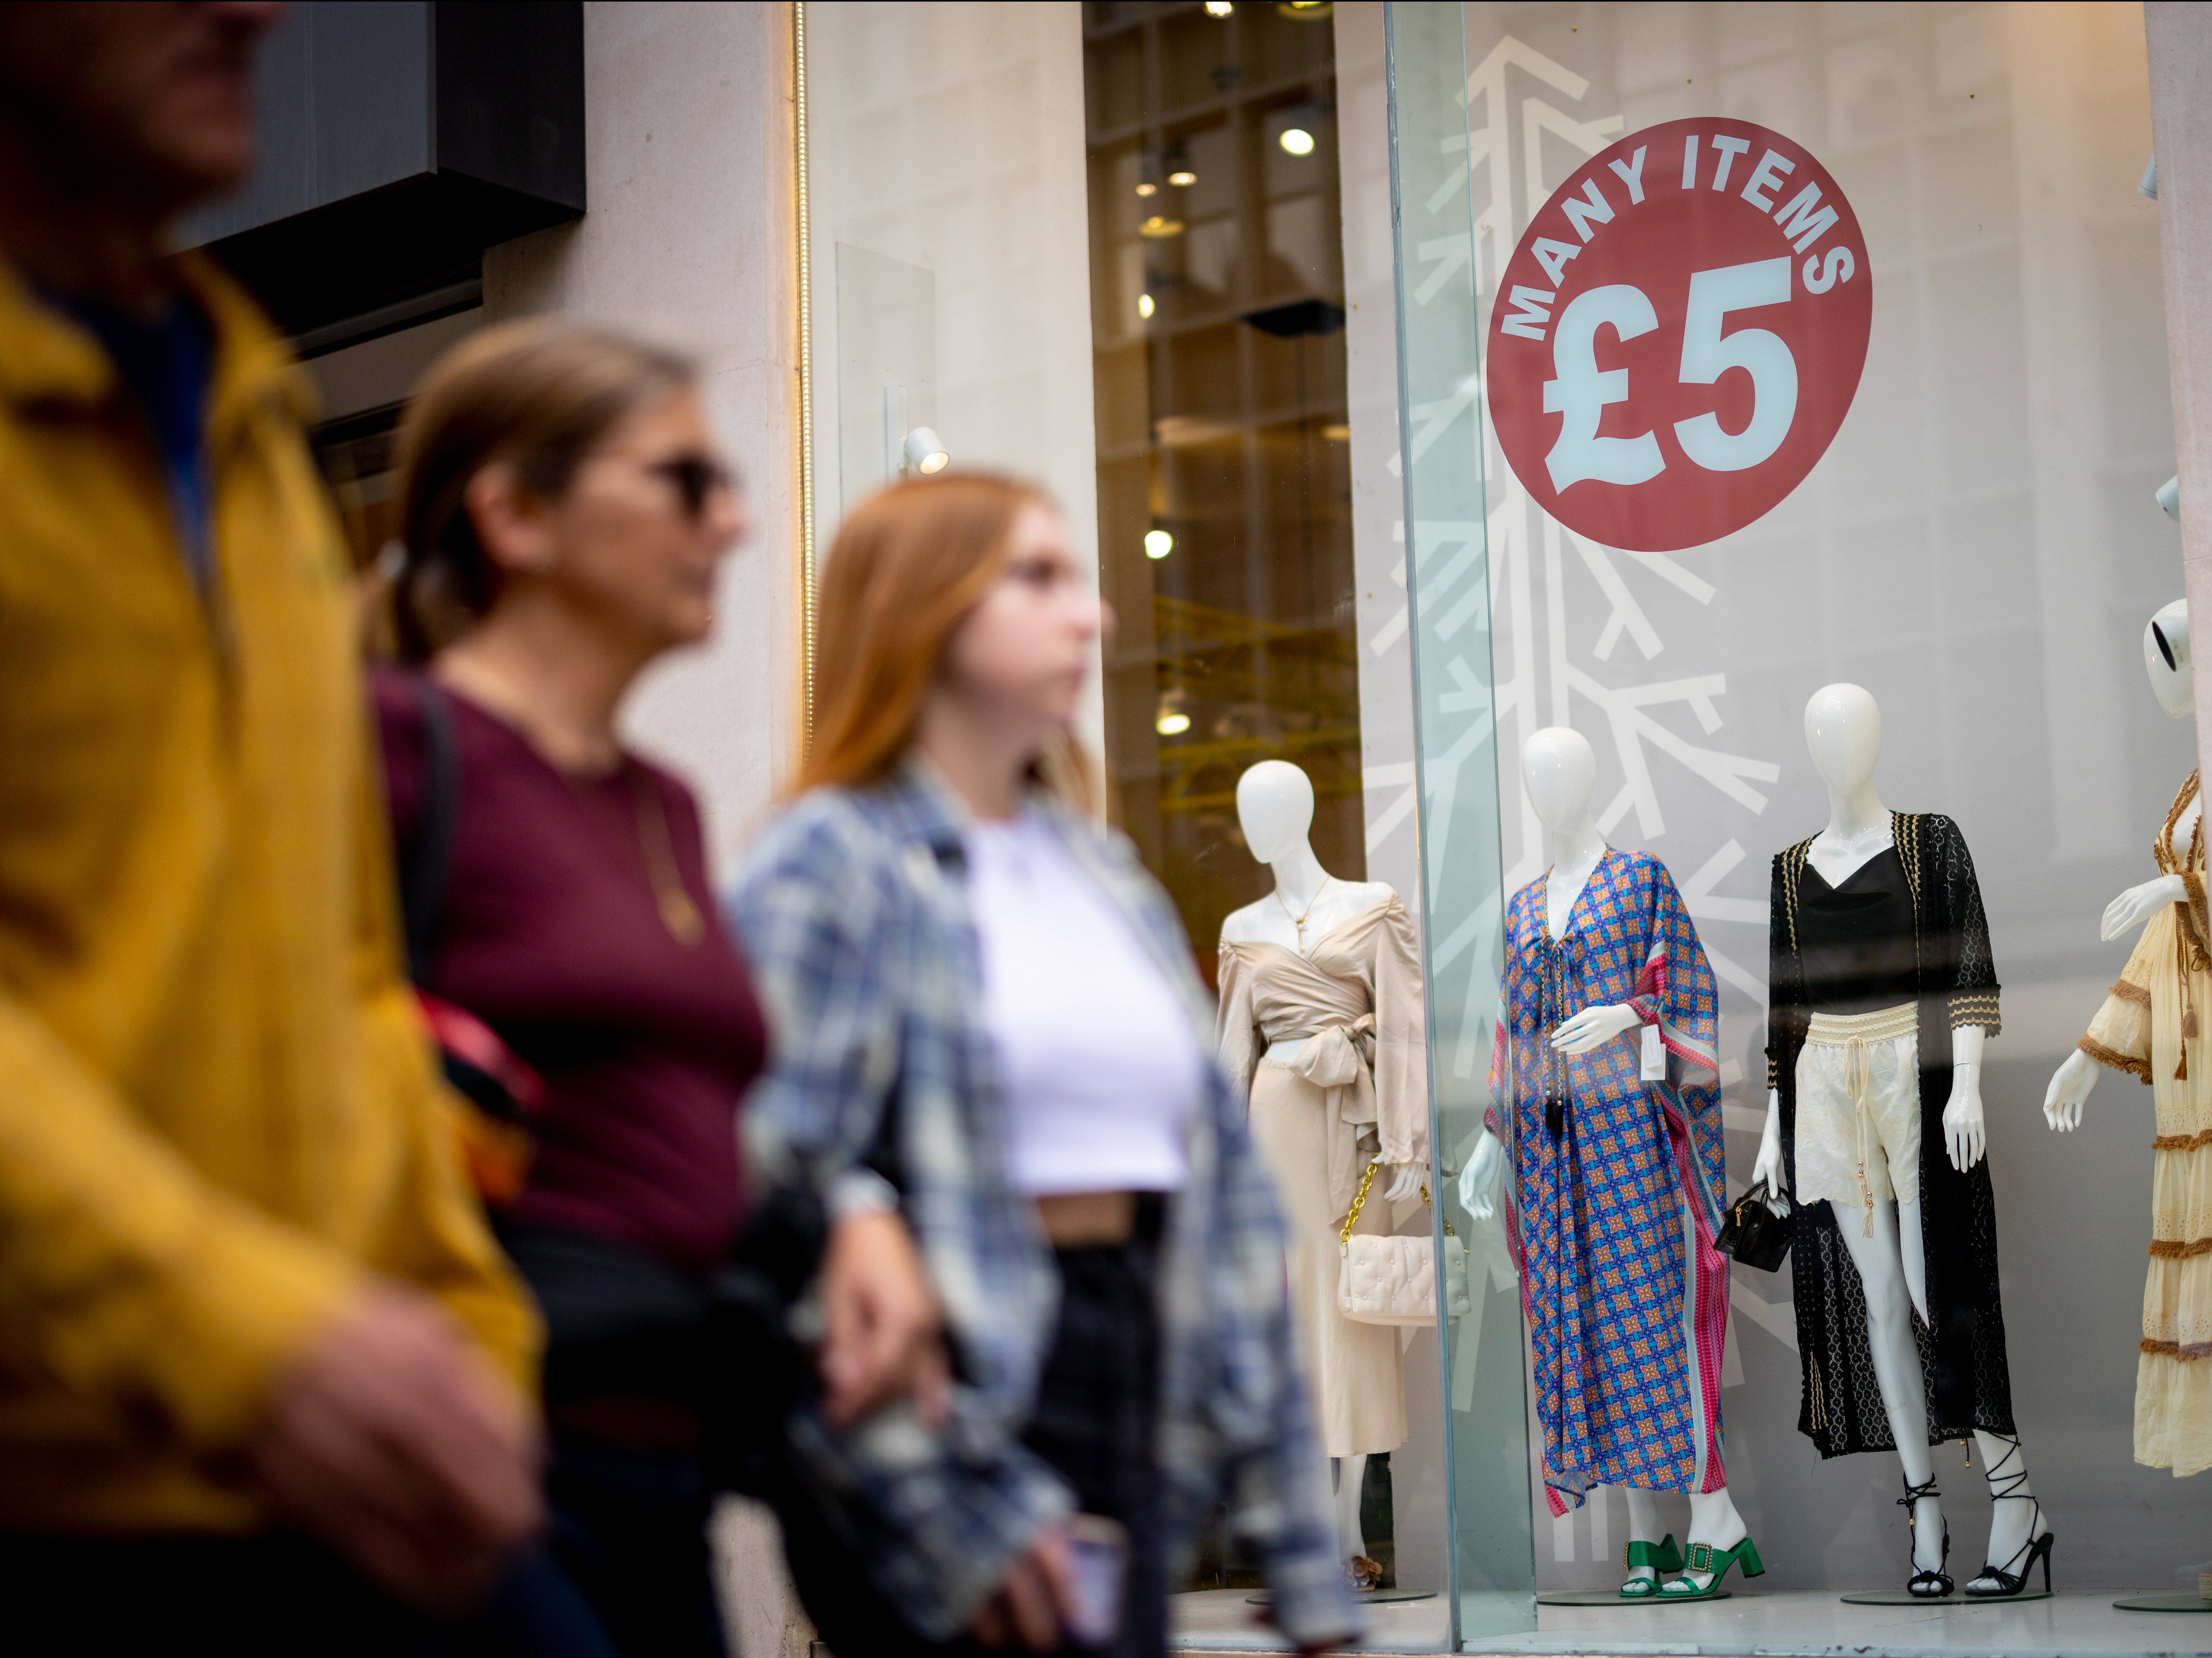 Consumer confidence is said to be at its lowest since the early 1970s